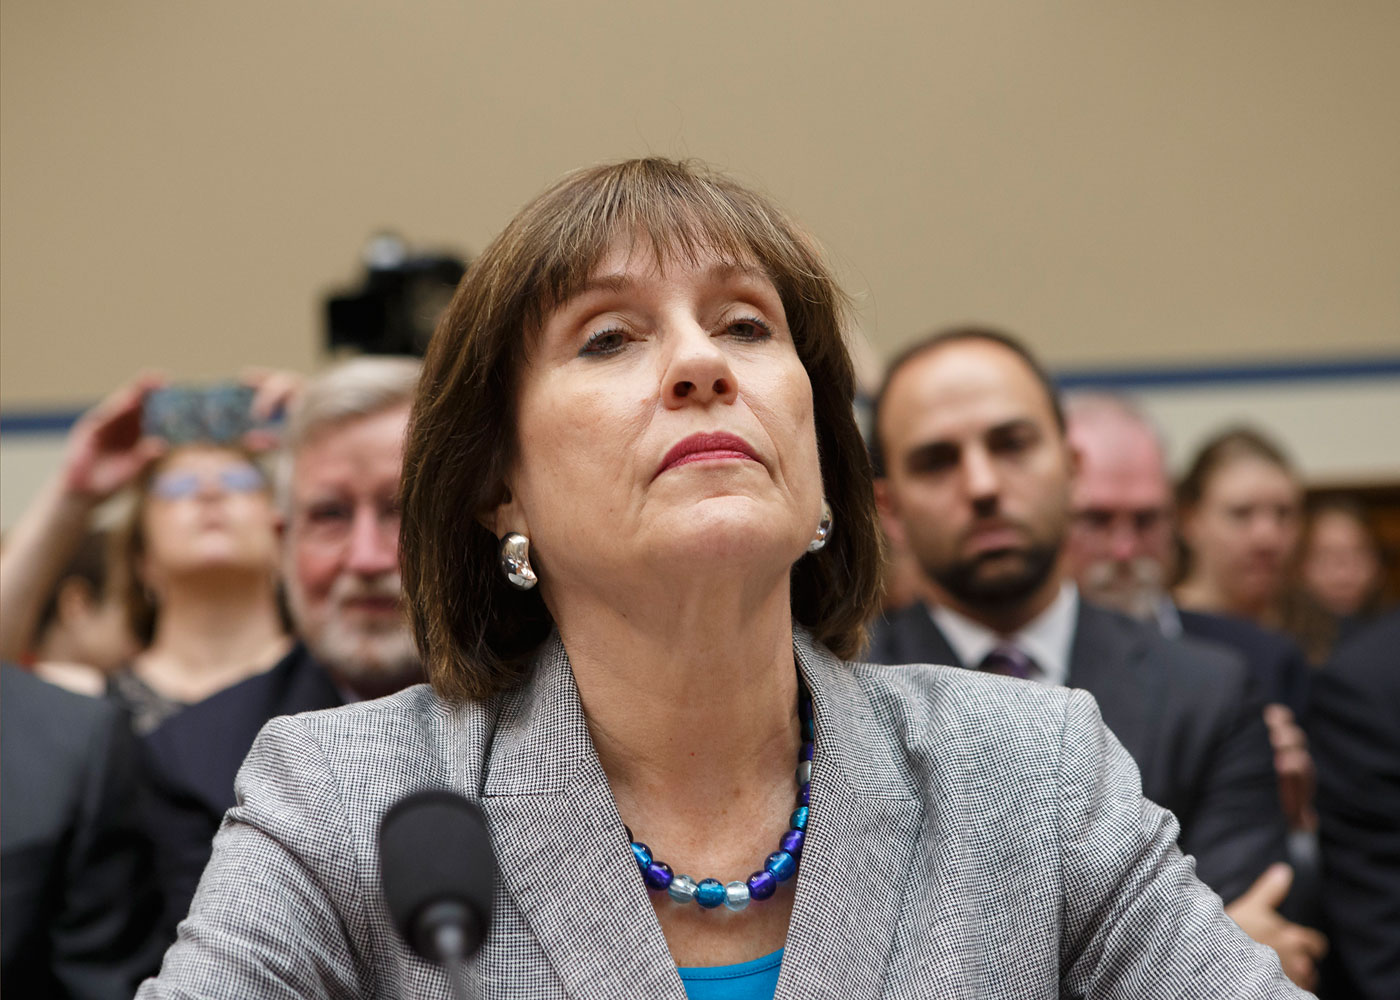 Internal Revenue Service official Lois Lerner during a hearing by the House Oversight Committee on Capitol Hill in Washington, May 22, 2013. (J. Scott Applewhite—AP)